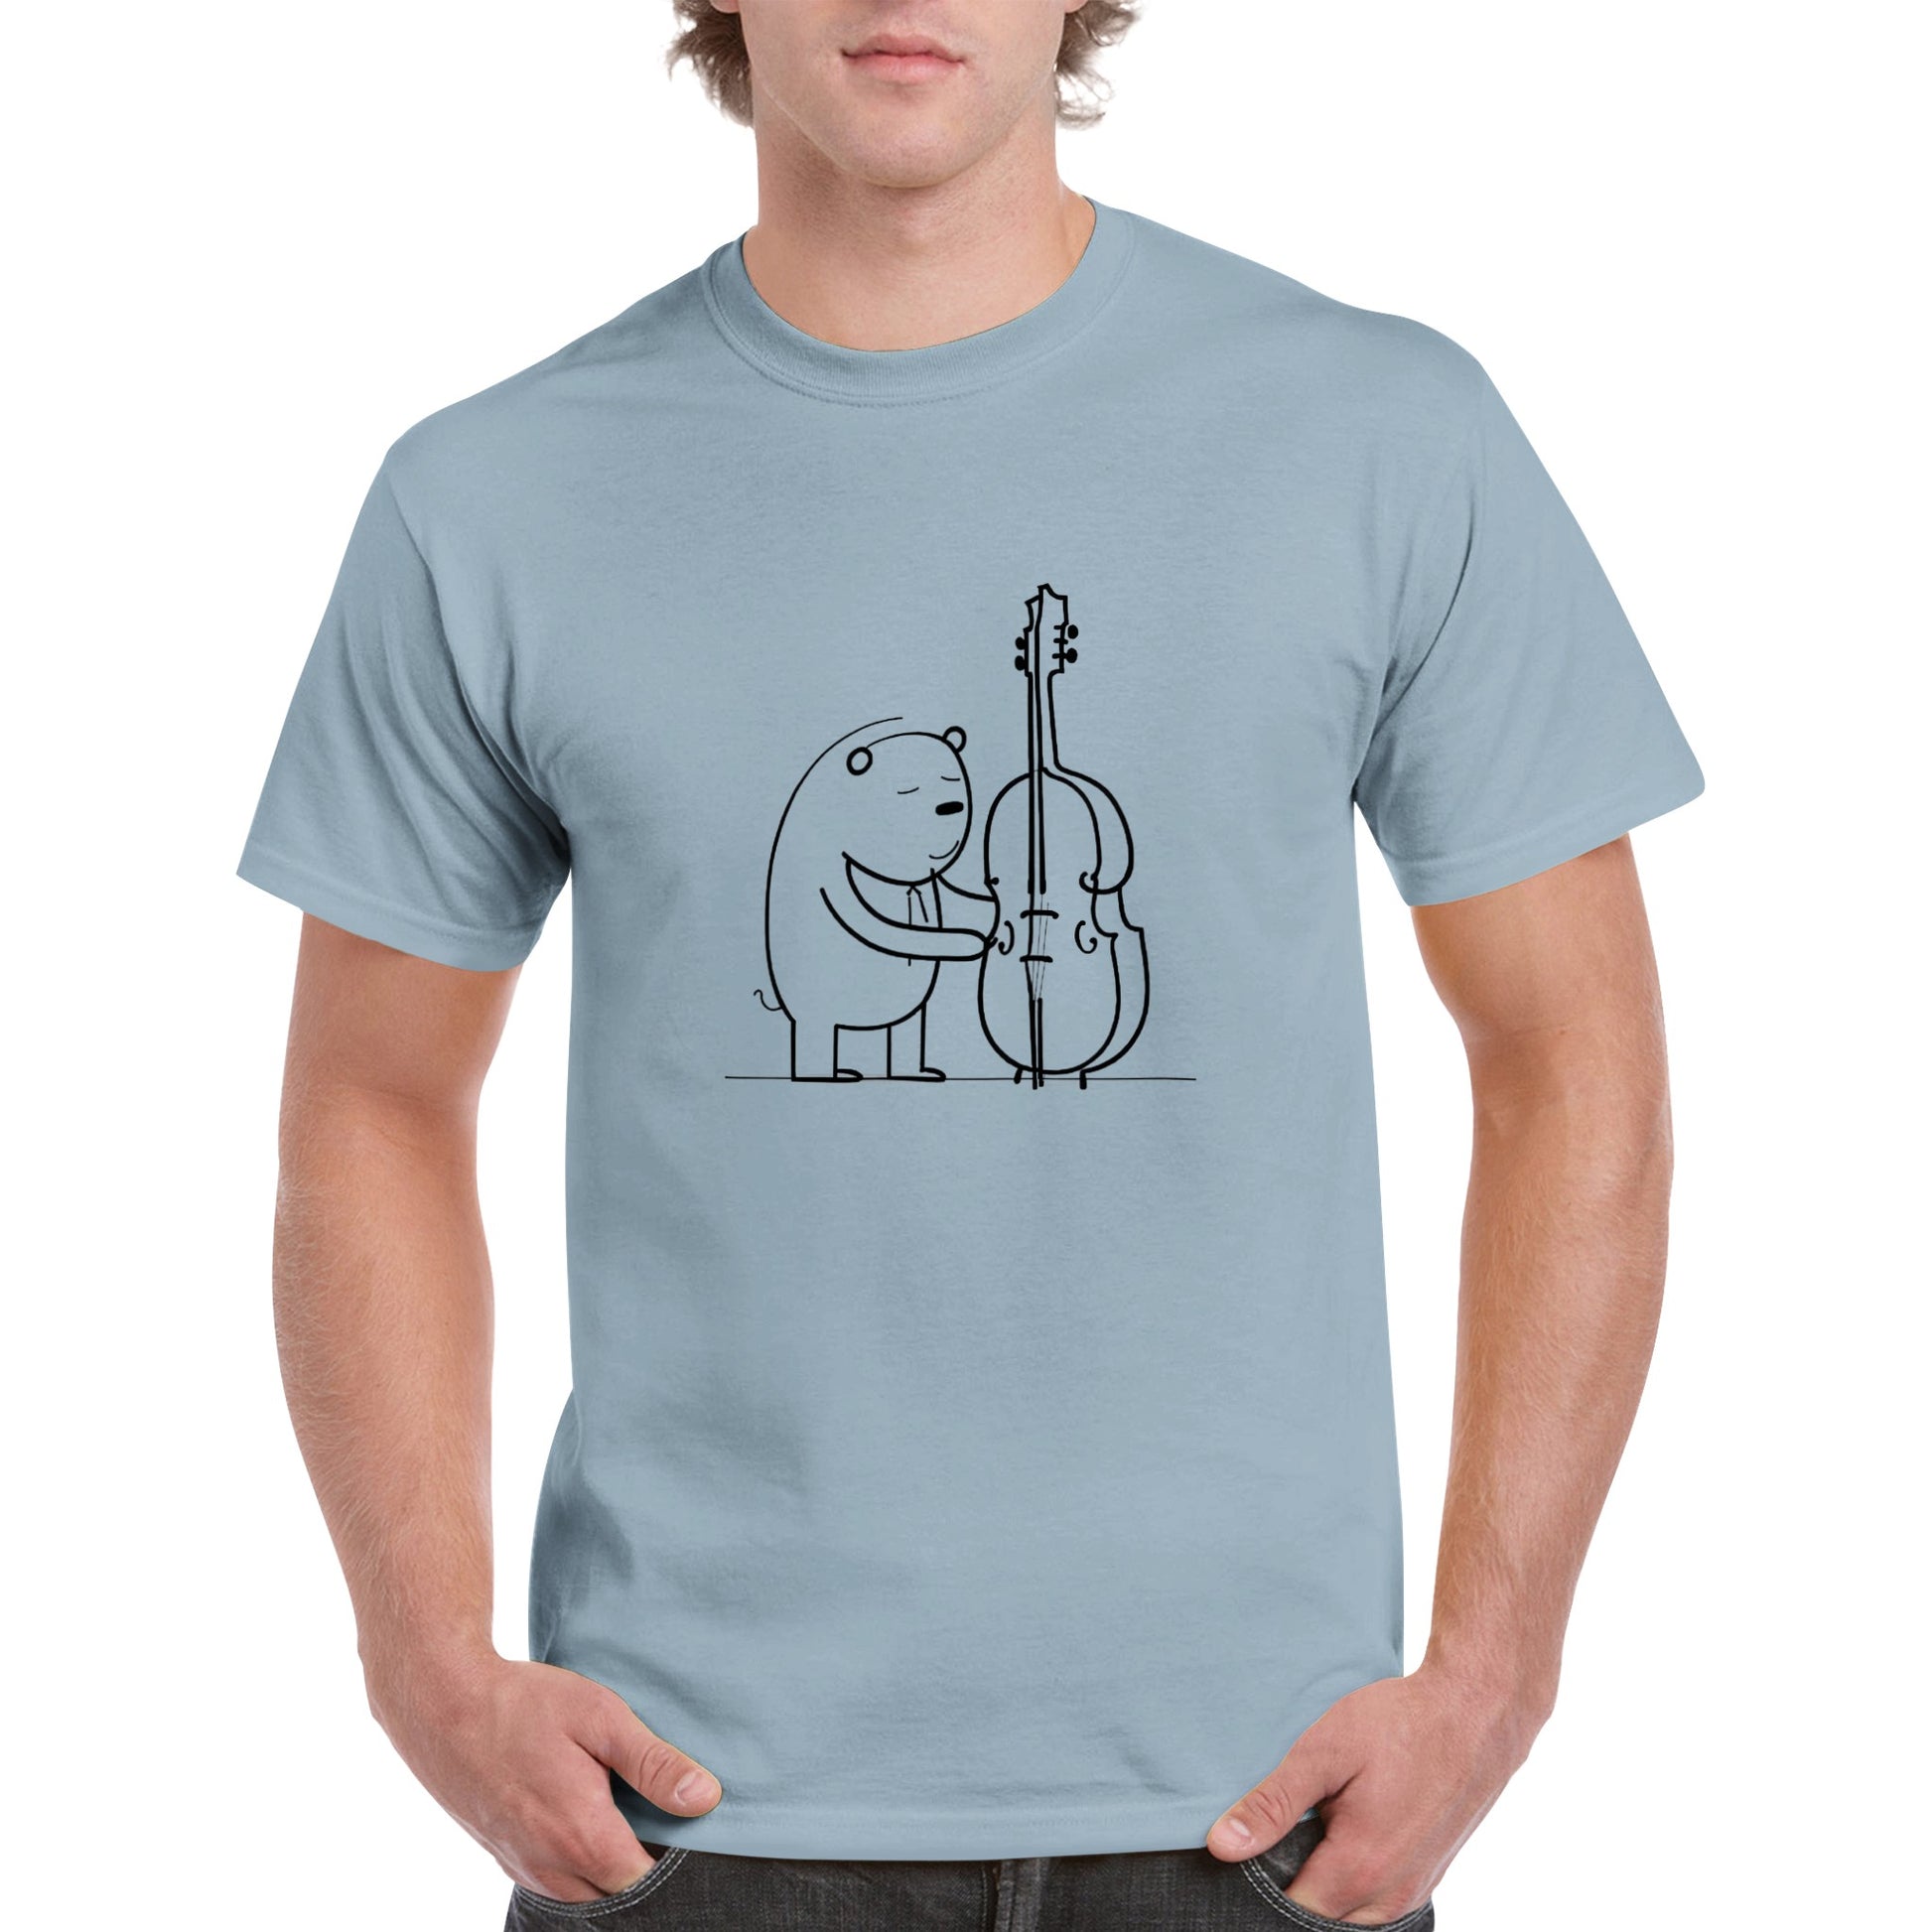 Guy wearing a sky blue t-shirt with a bear playing a double bass print